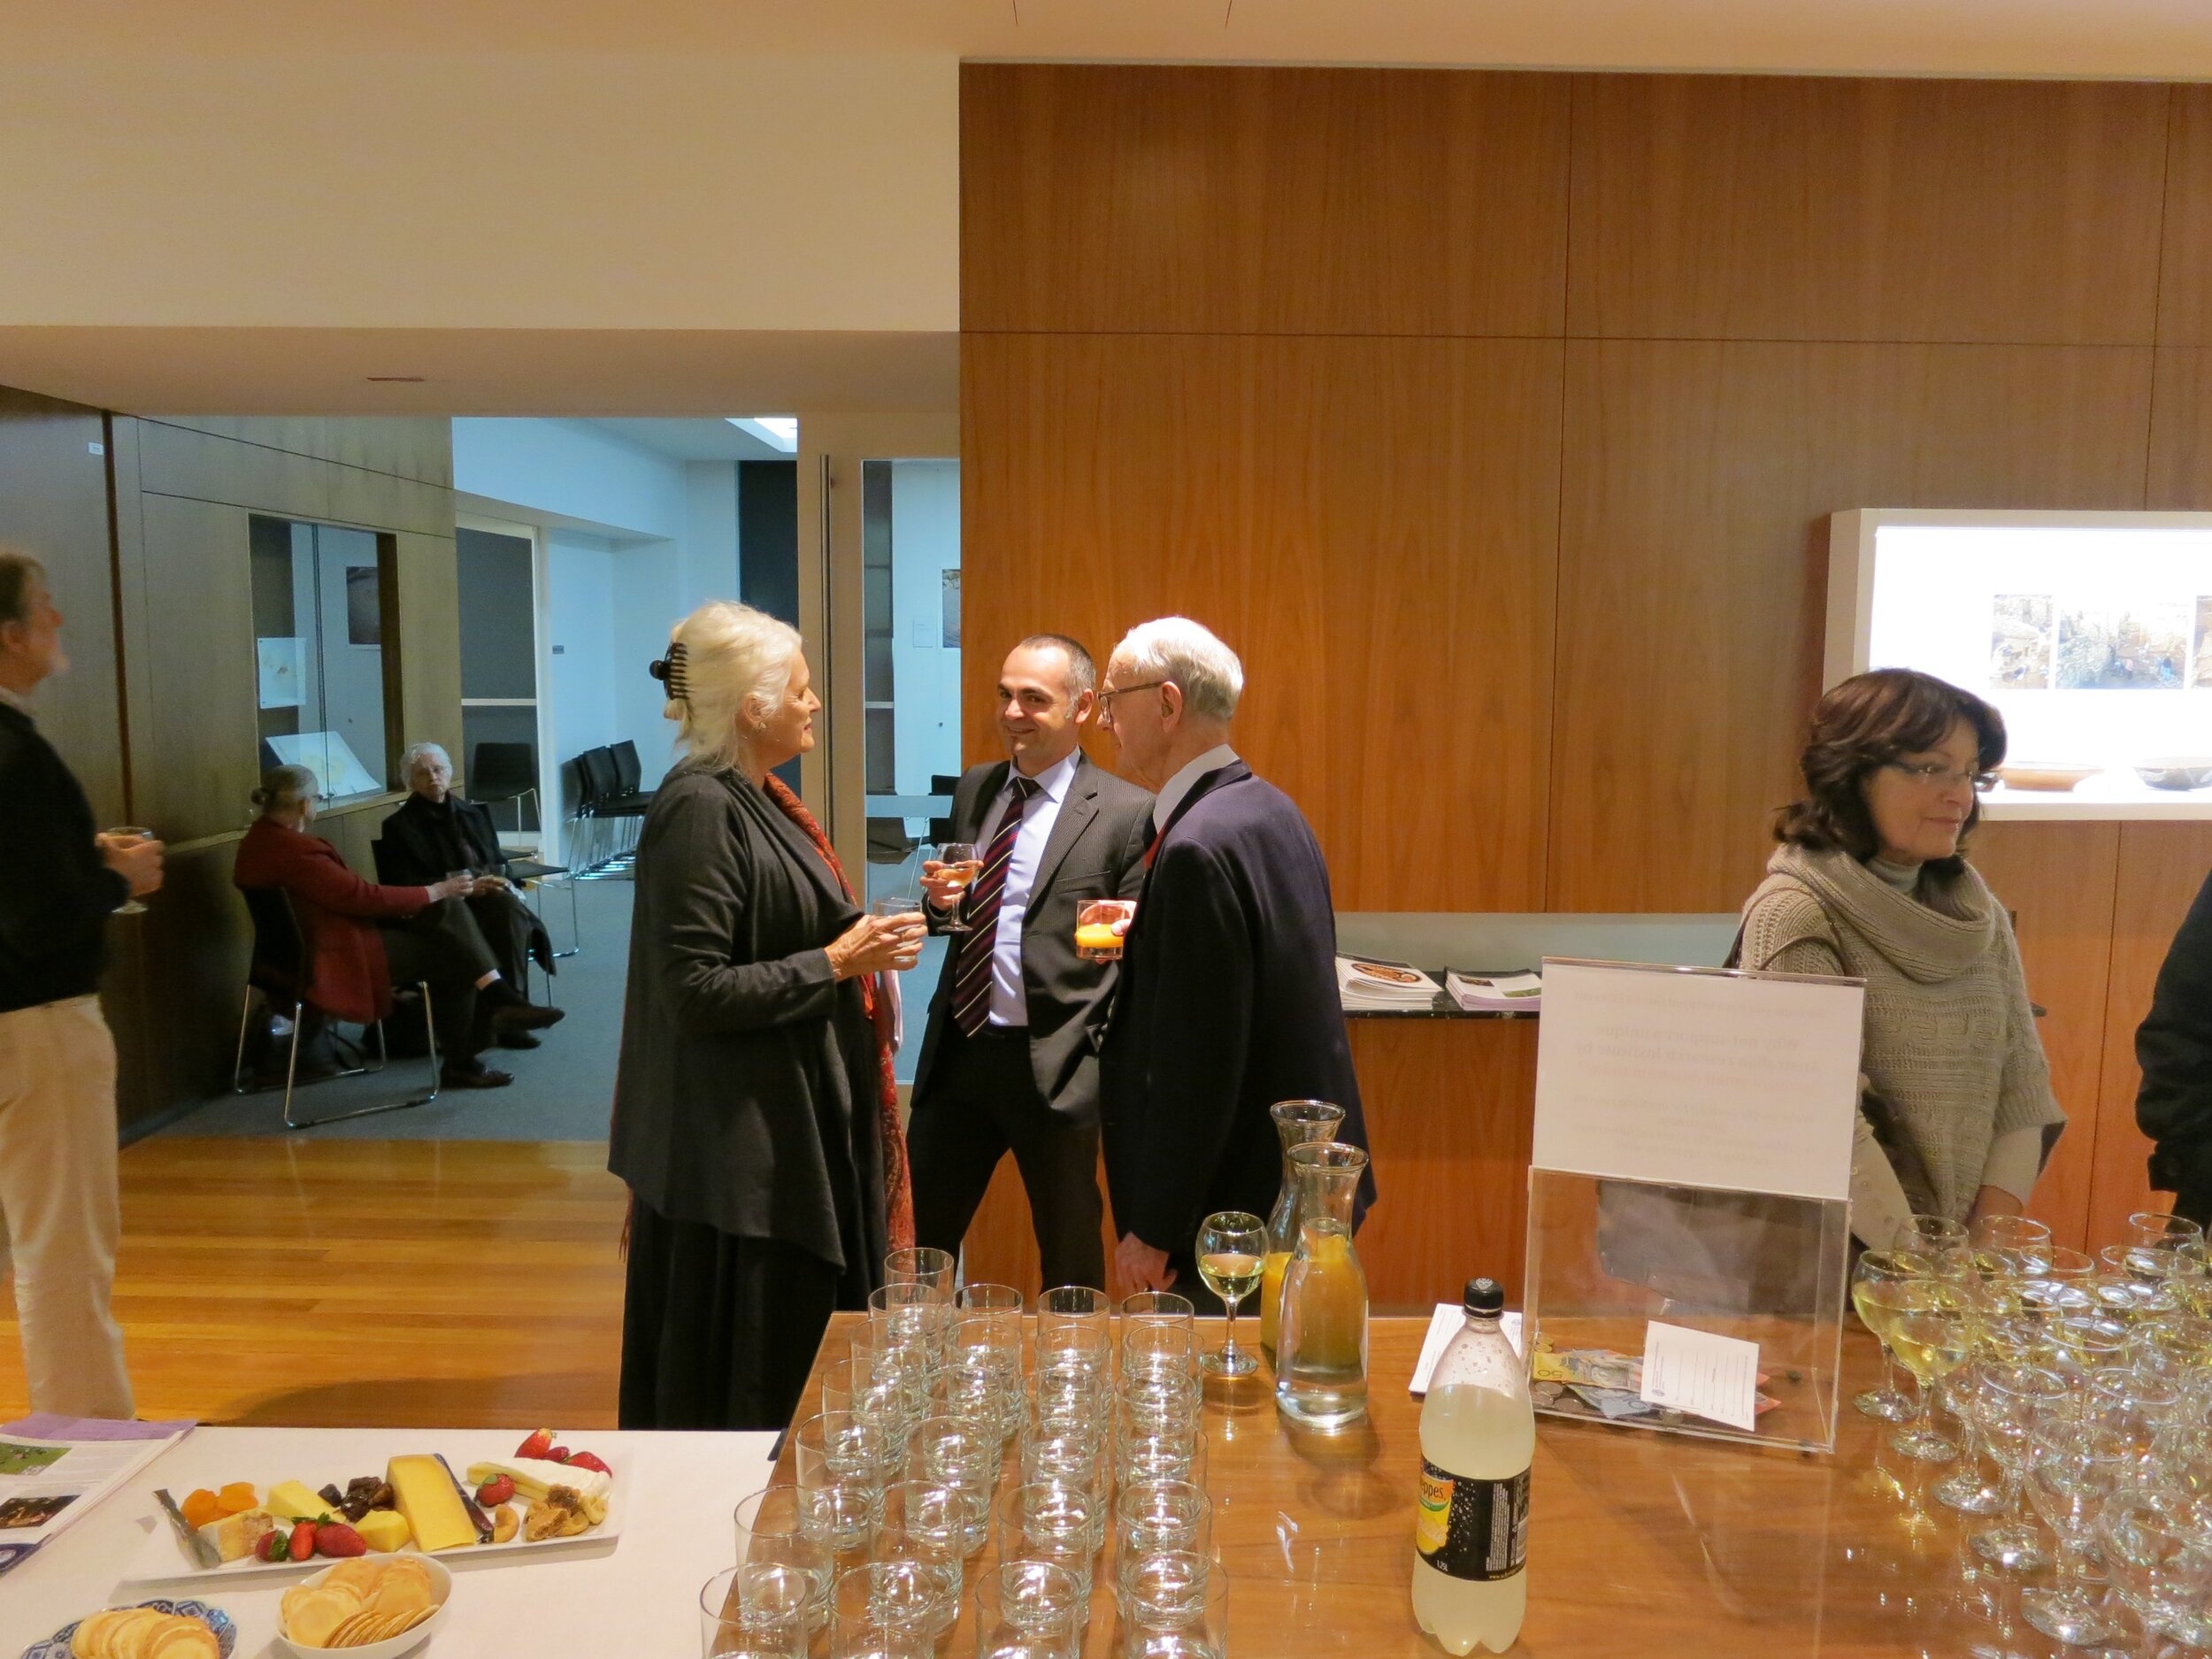  From left: Prof. Diana Wood Conroy; Andreas Hadjithemistos, Consul of the High Commission of Cyprus in Canberra; and the late Prof. Alexander Cambitoglou together at the opening of  Response to Cyprus,  10 July 2013. The event was hosted by the Aust